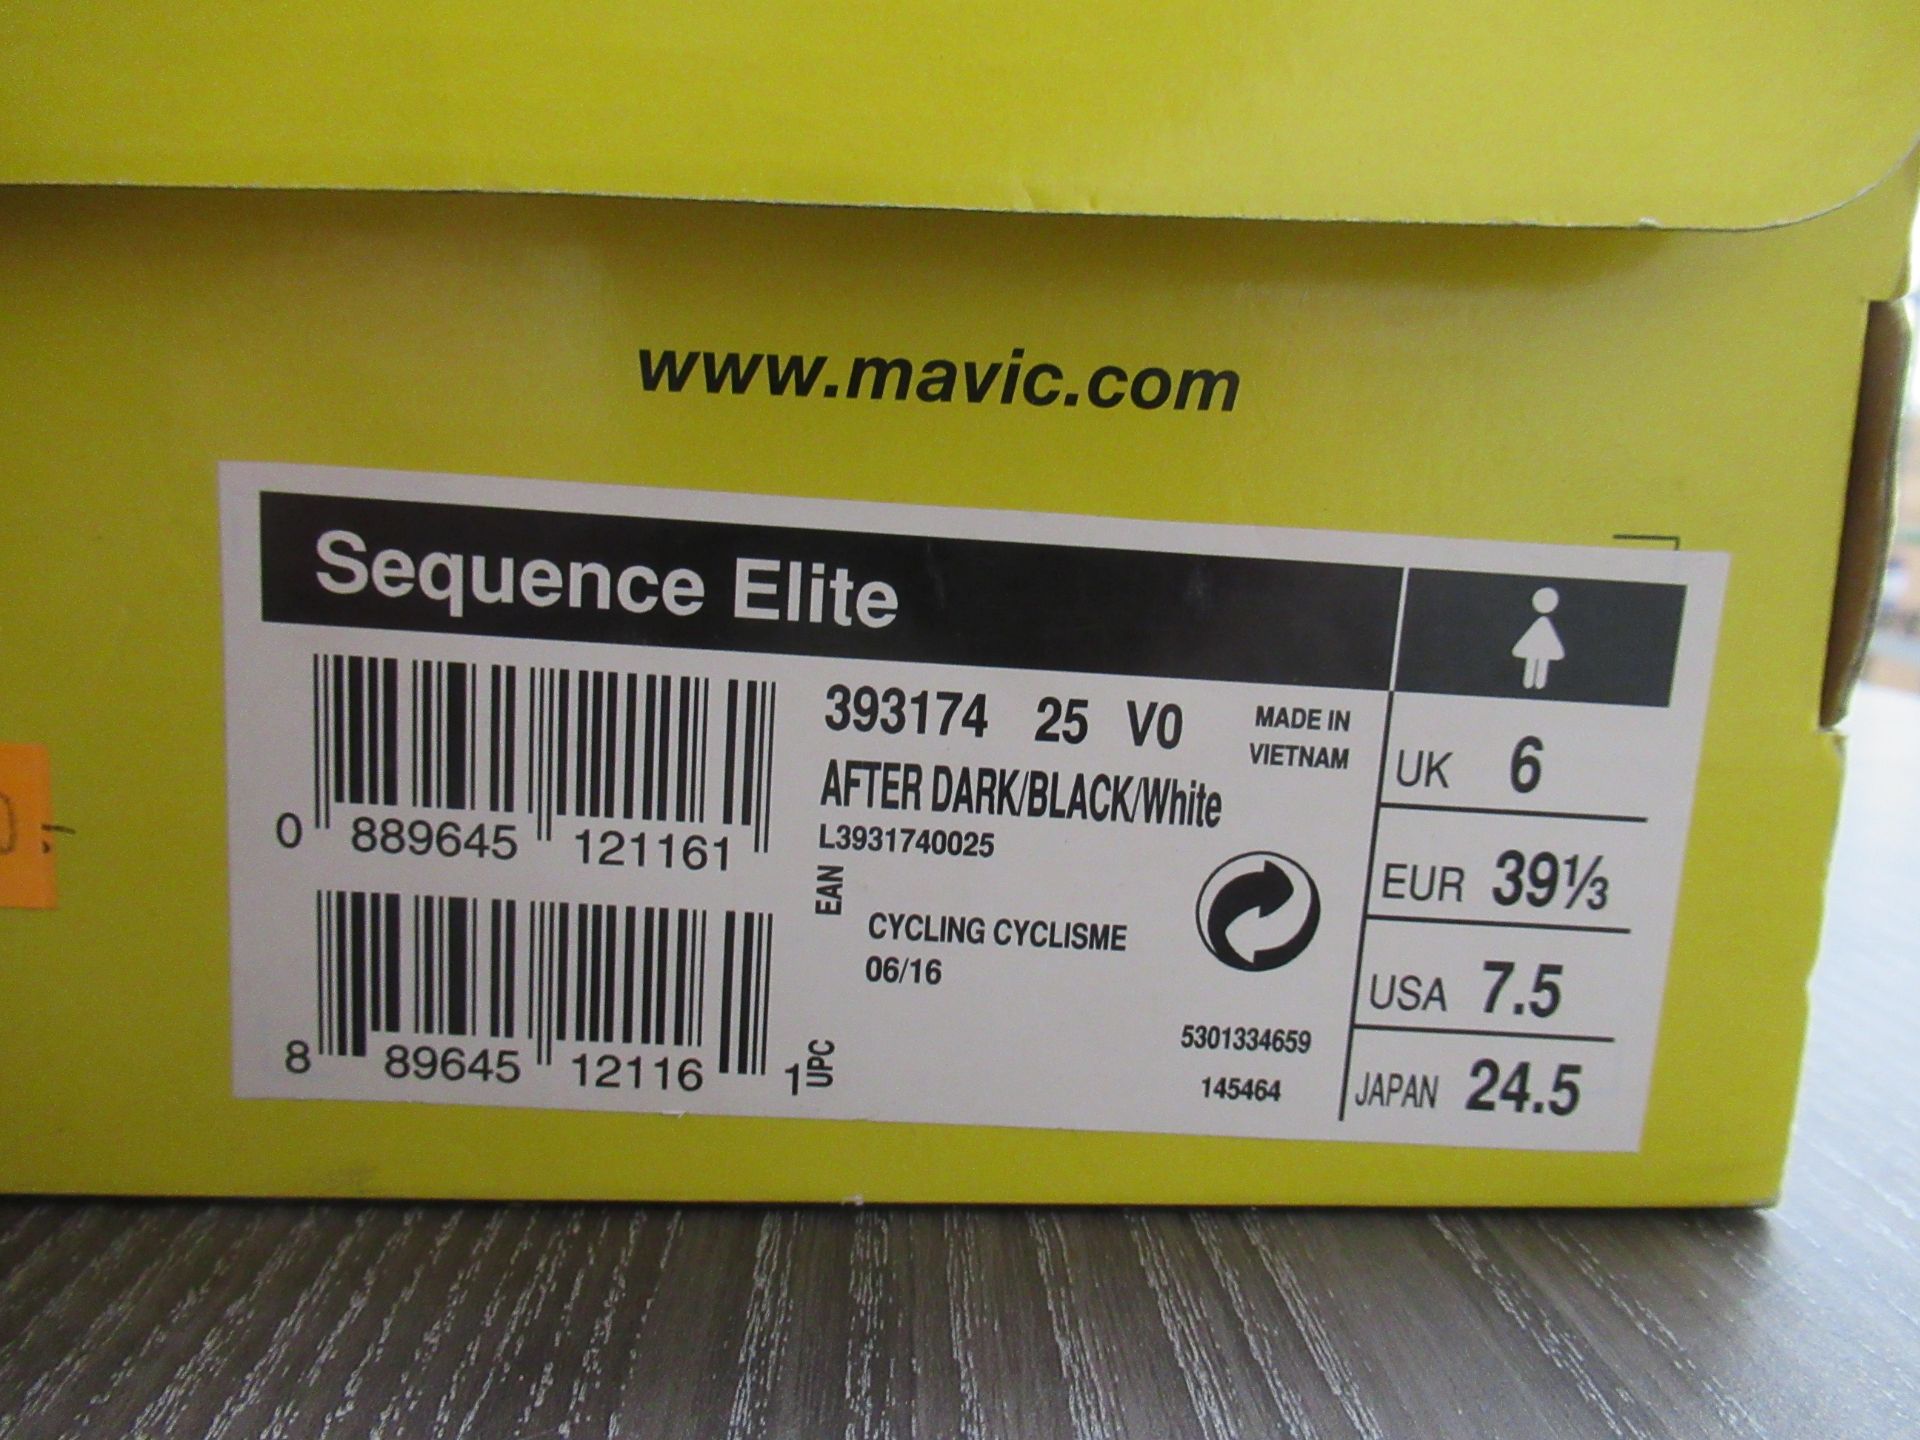 Pair of Mavic Sequence Elite ladies cycling shoes (after dark/black/white) - boxed EU size 39 1/3 (R - Image 2 of 3